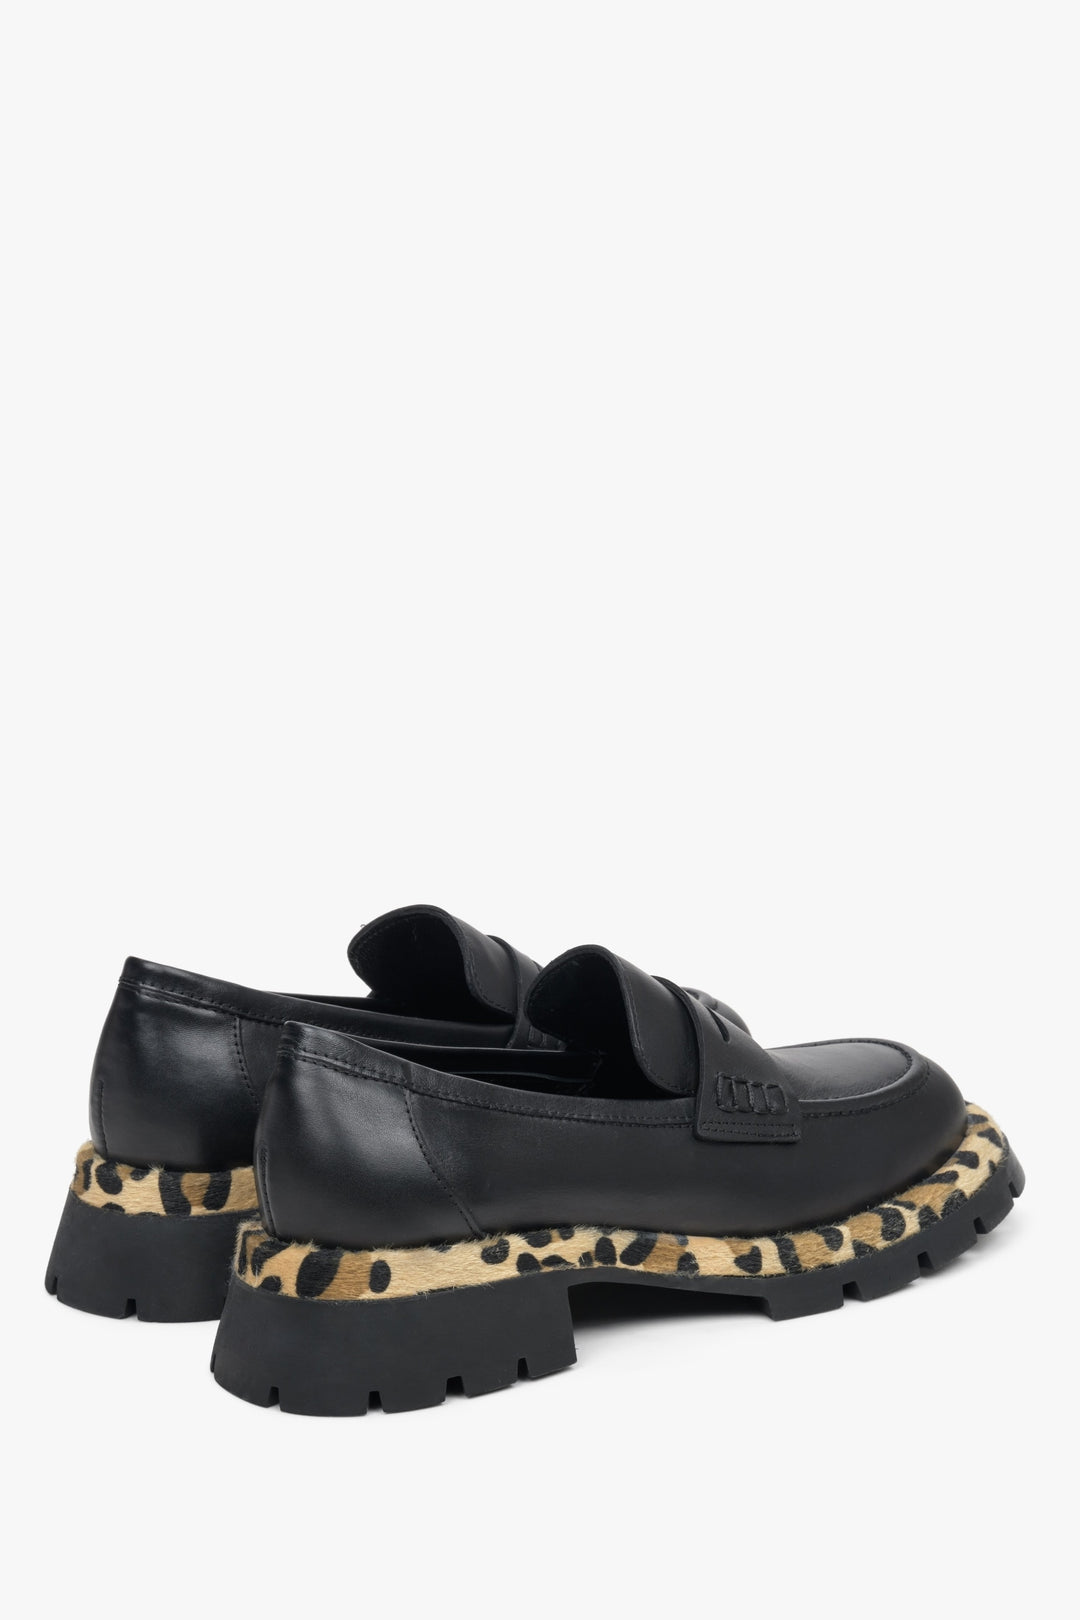 Women's black Estro  leather moccasins with a panther print - close-up on the heel and side line.